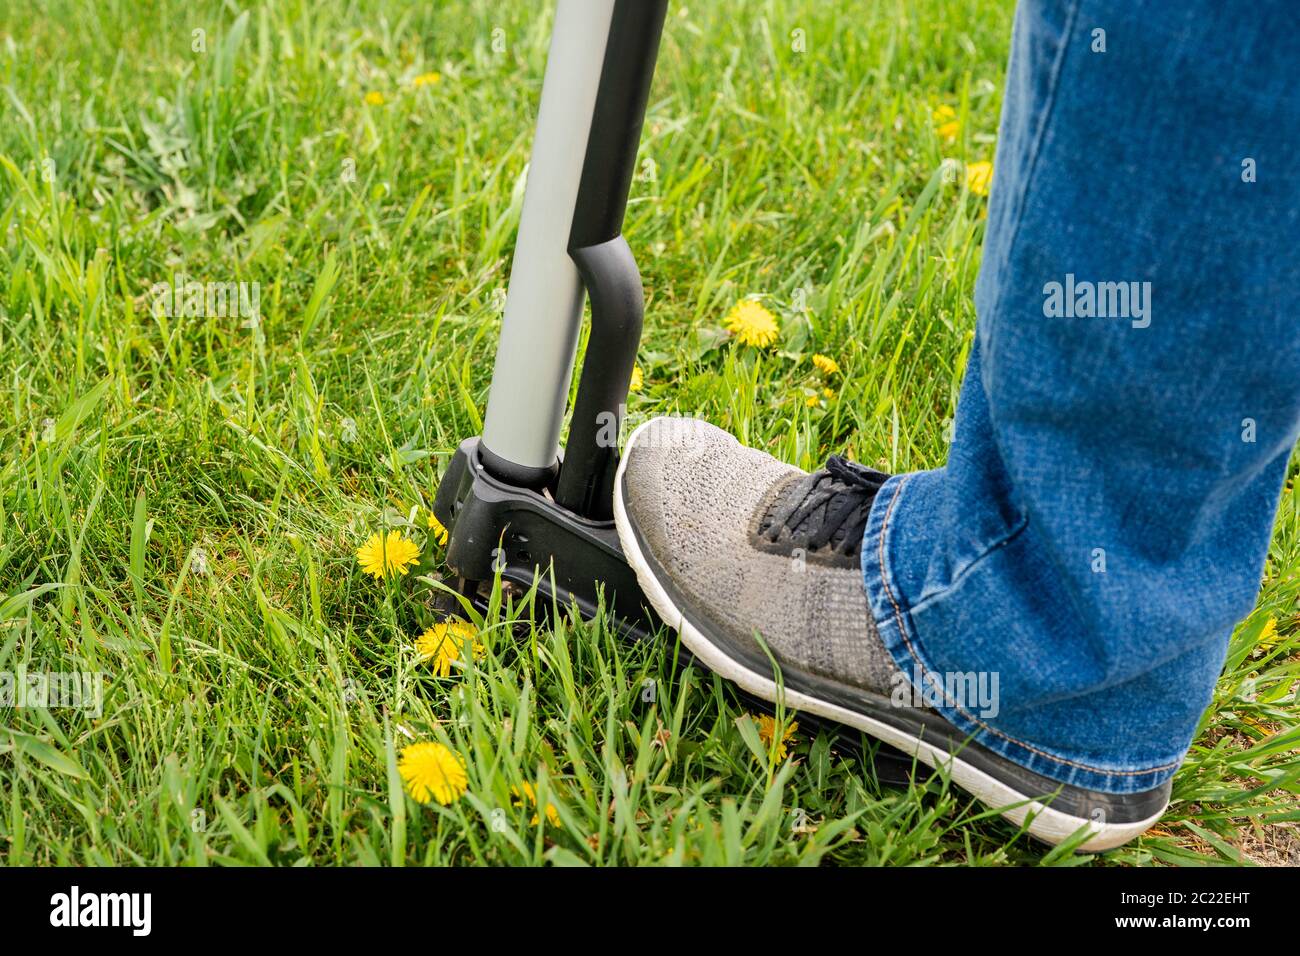 Seasonal yard work. Mechanical device for removing dandelion weeds by pulling the tap root. Weed control. Stock Photo